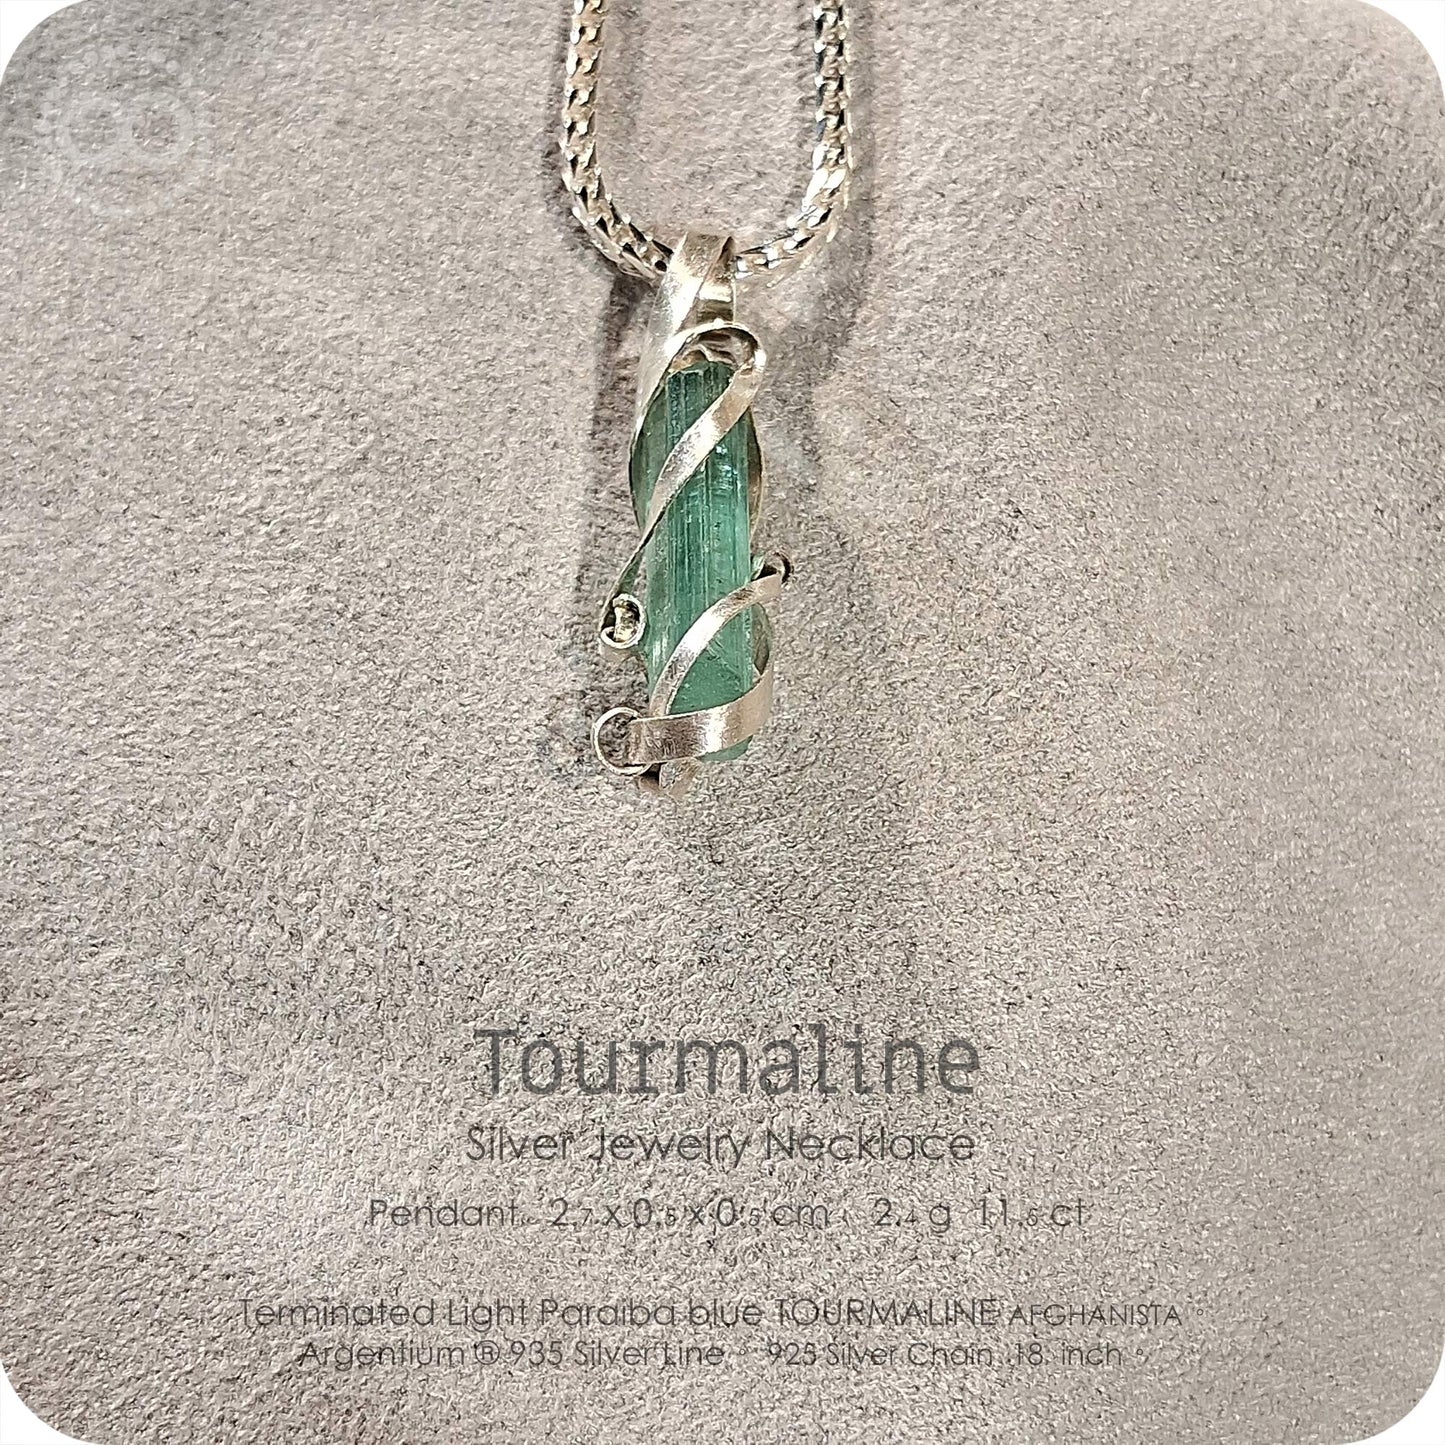 Terminated  Tourmaline Silver Jewelry Necklace - H232